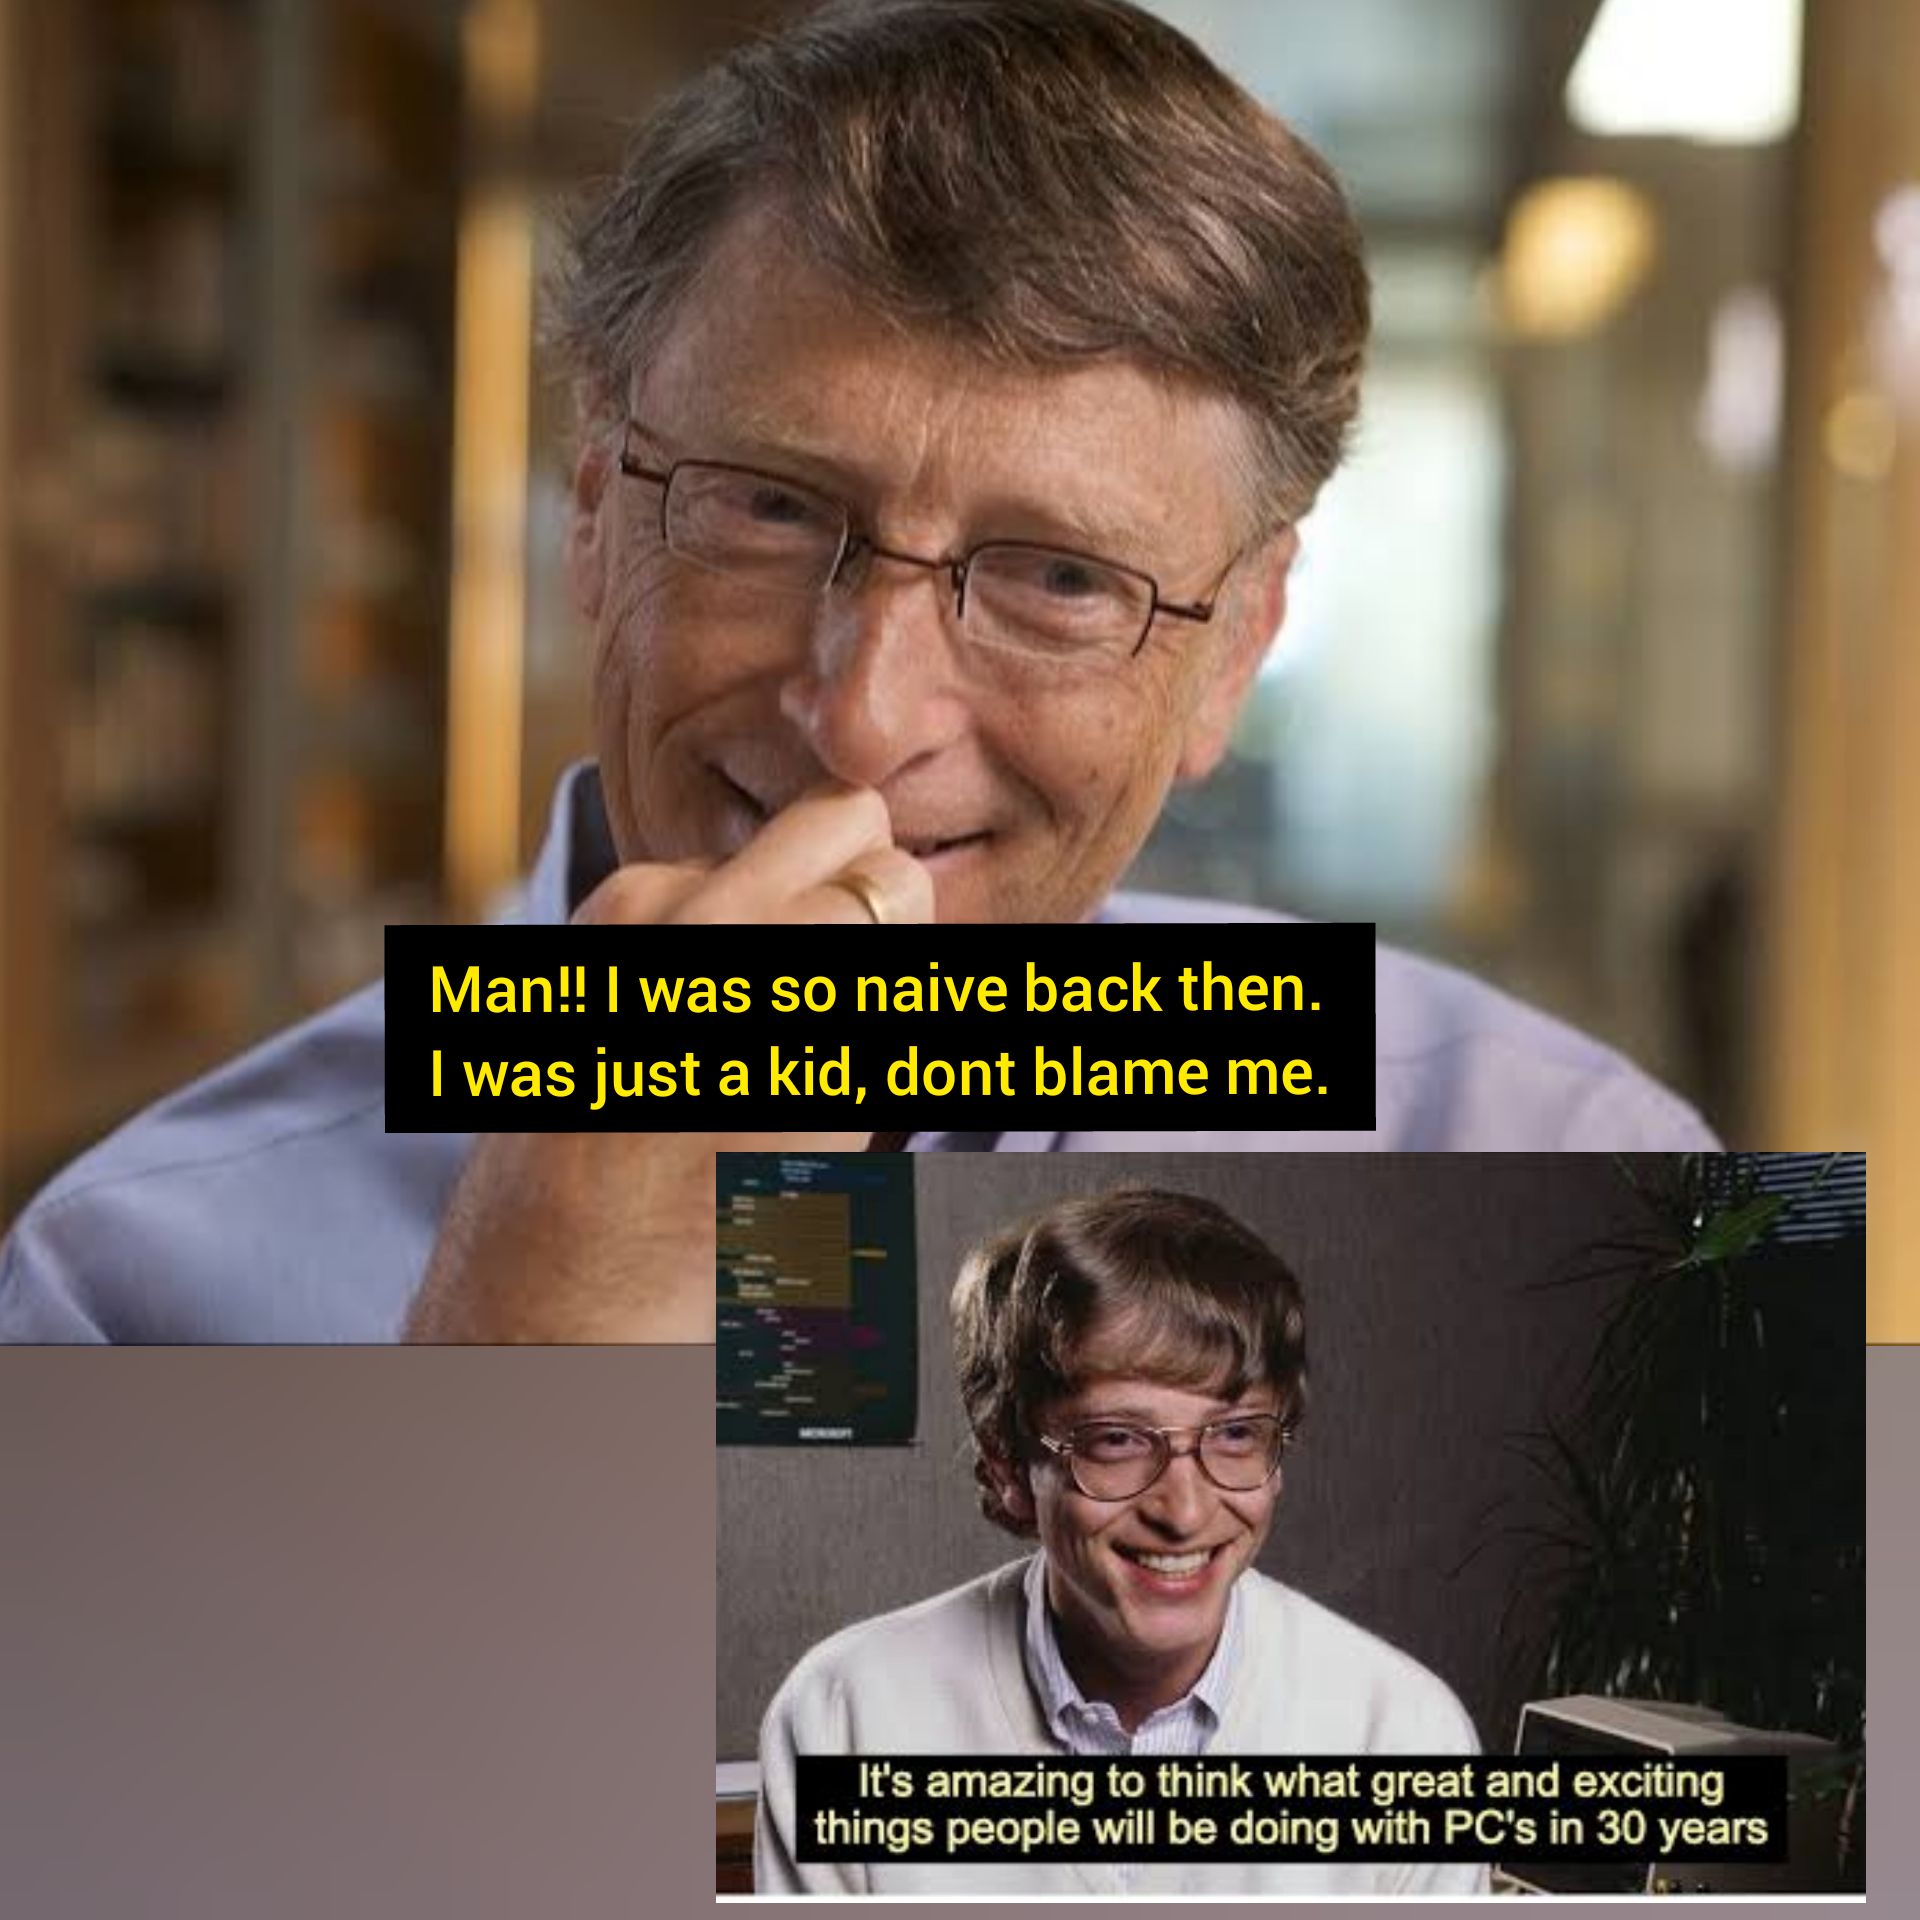 Bill Gates reacting to his younger self.